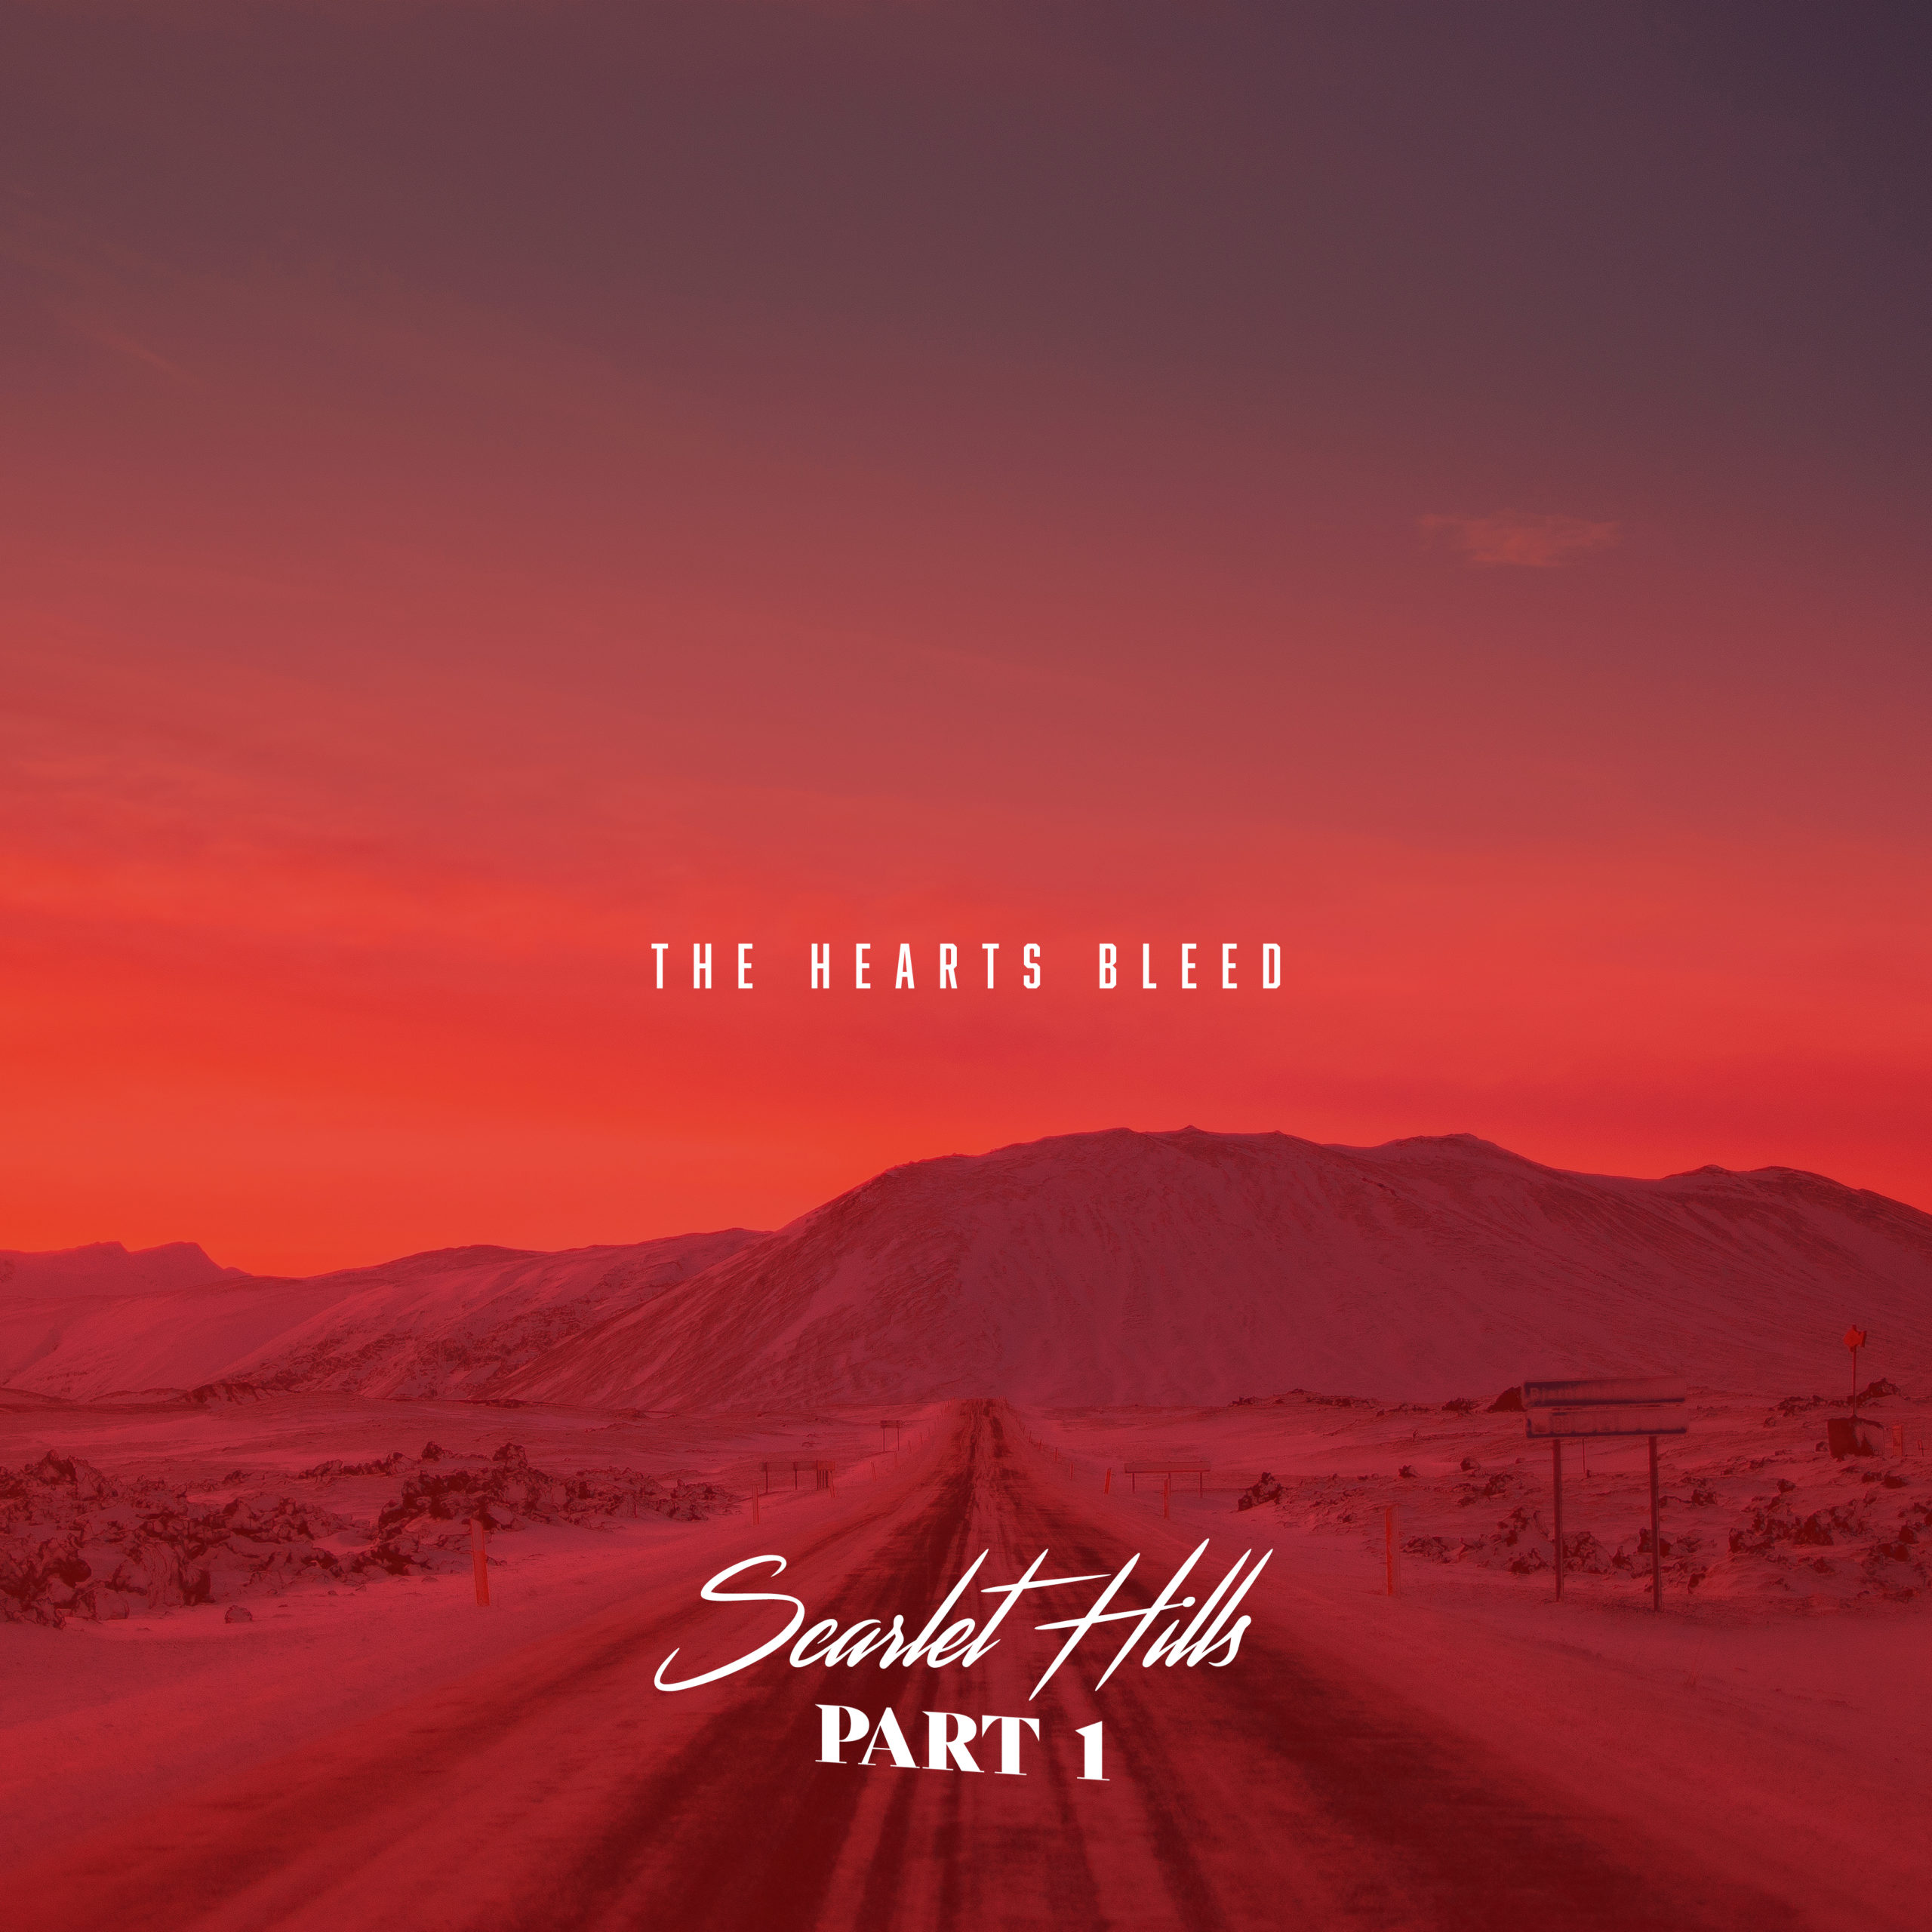 Producer Je’kob Releases Concept Album “The Hearts Bleed – The Scarlet Hills (Part 1)”